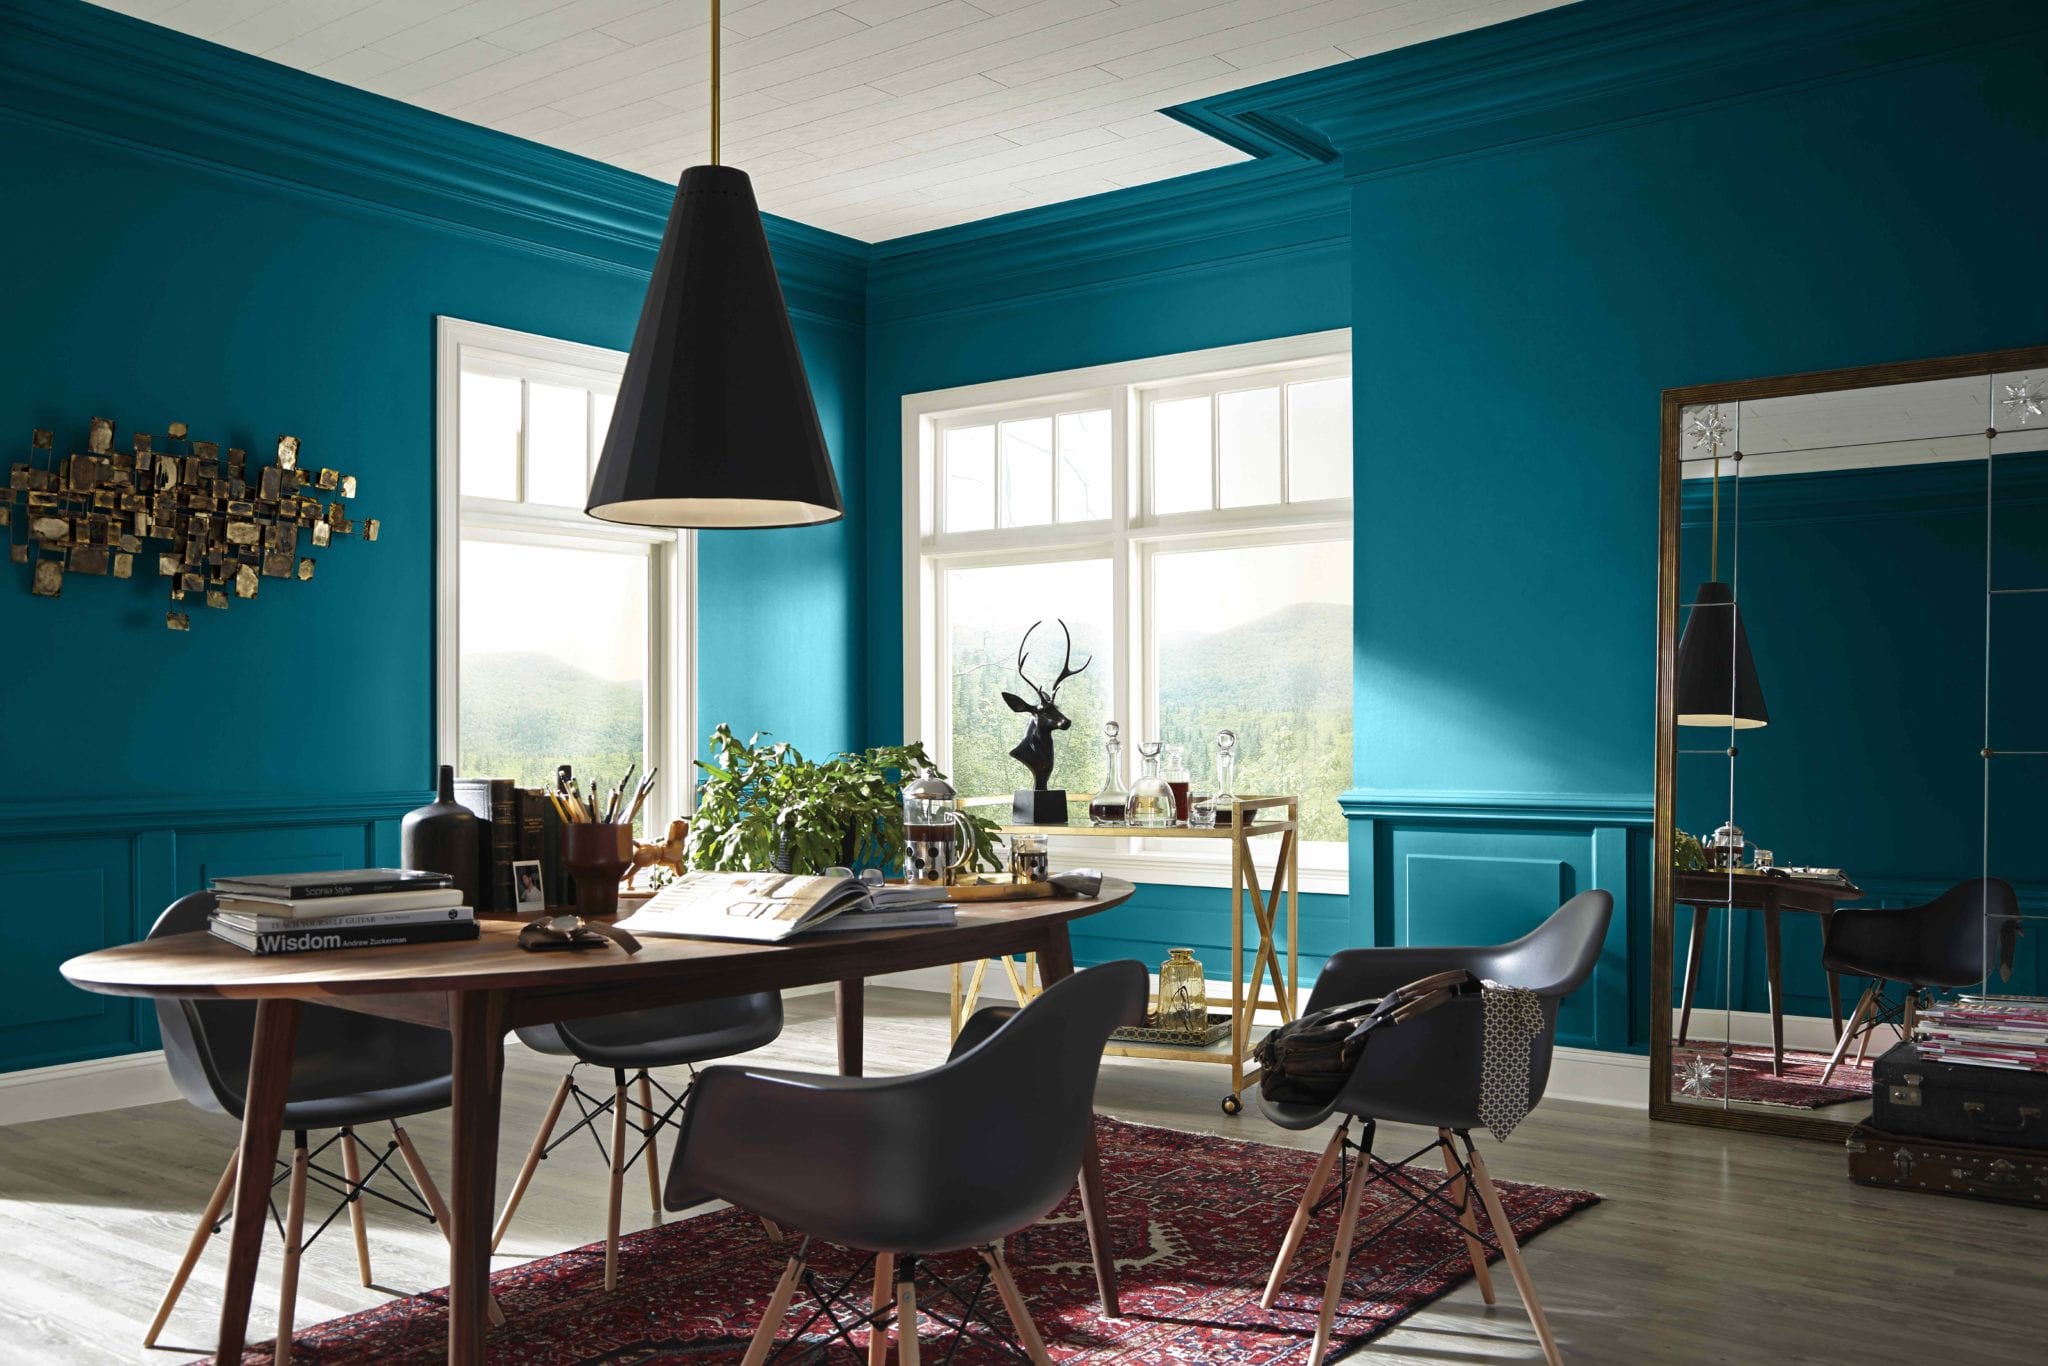 Inspired by Wanderlust, Sherwin-Williams Names 2018 Color of the Year